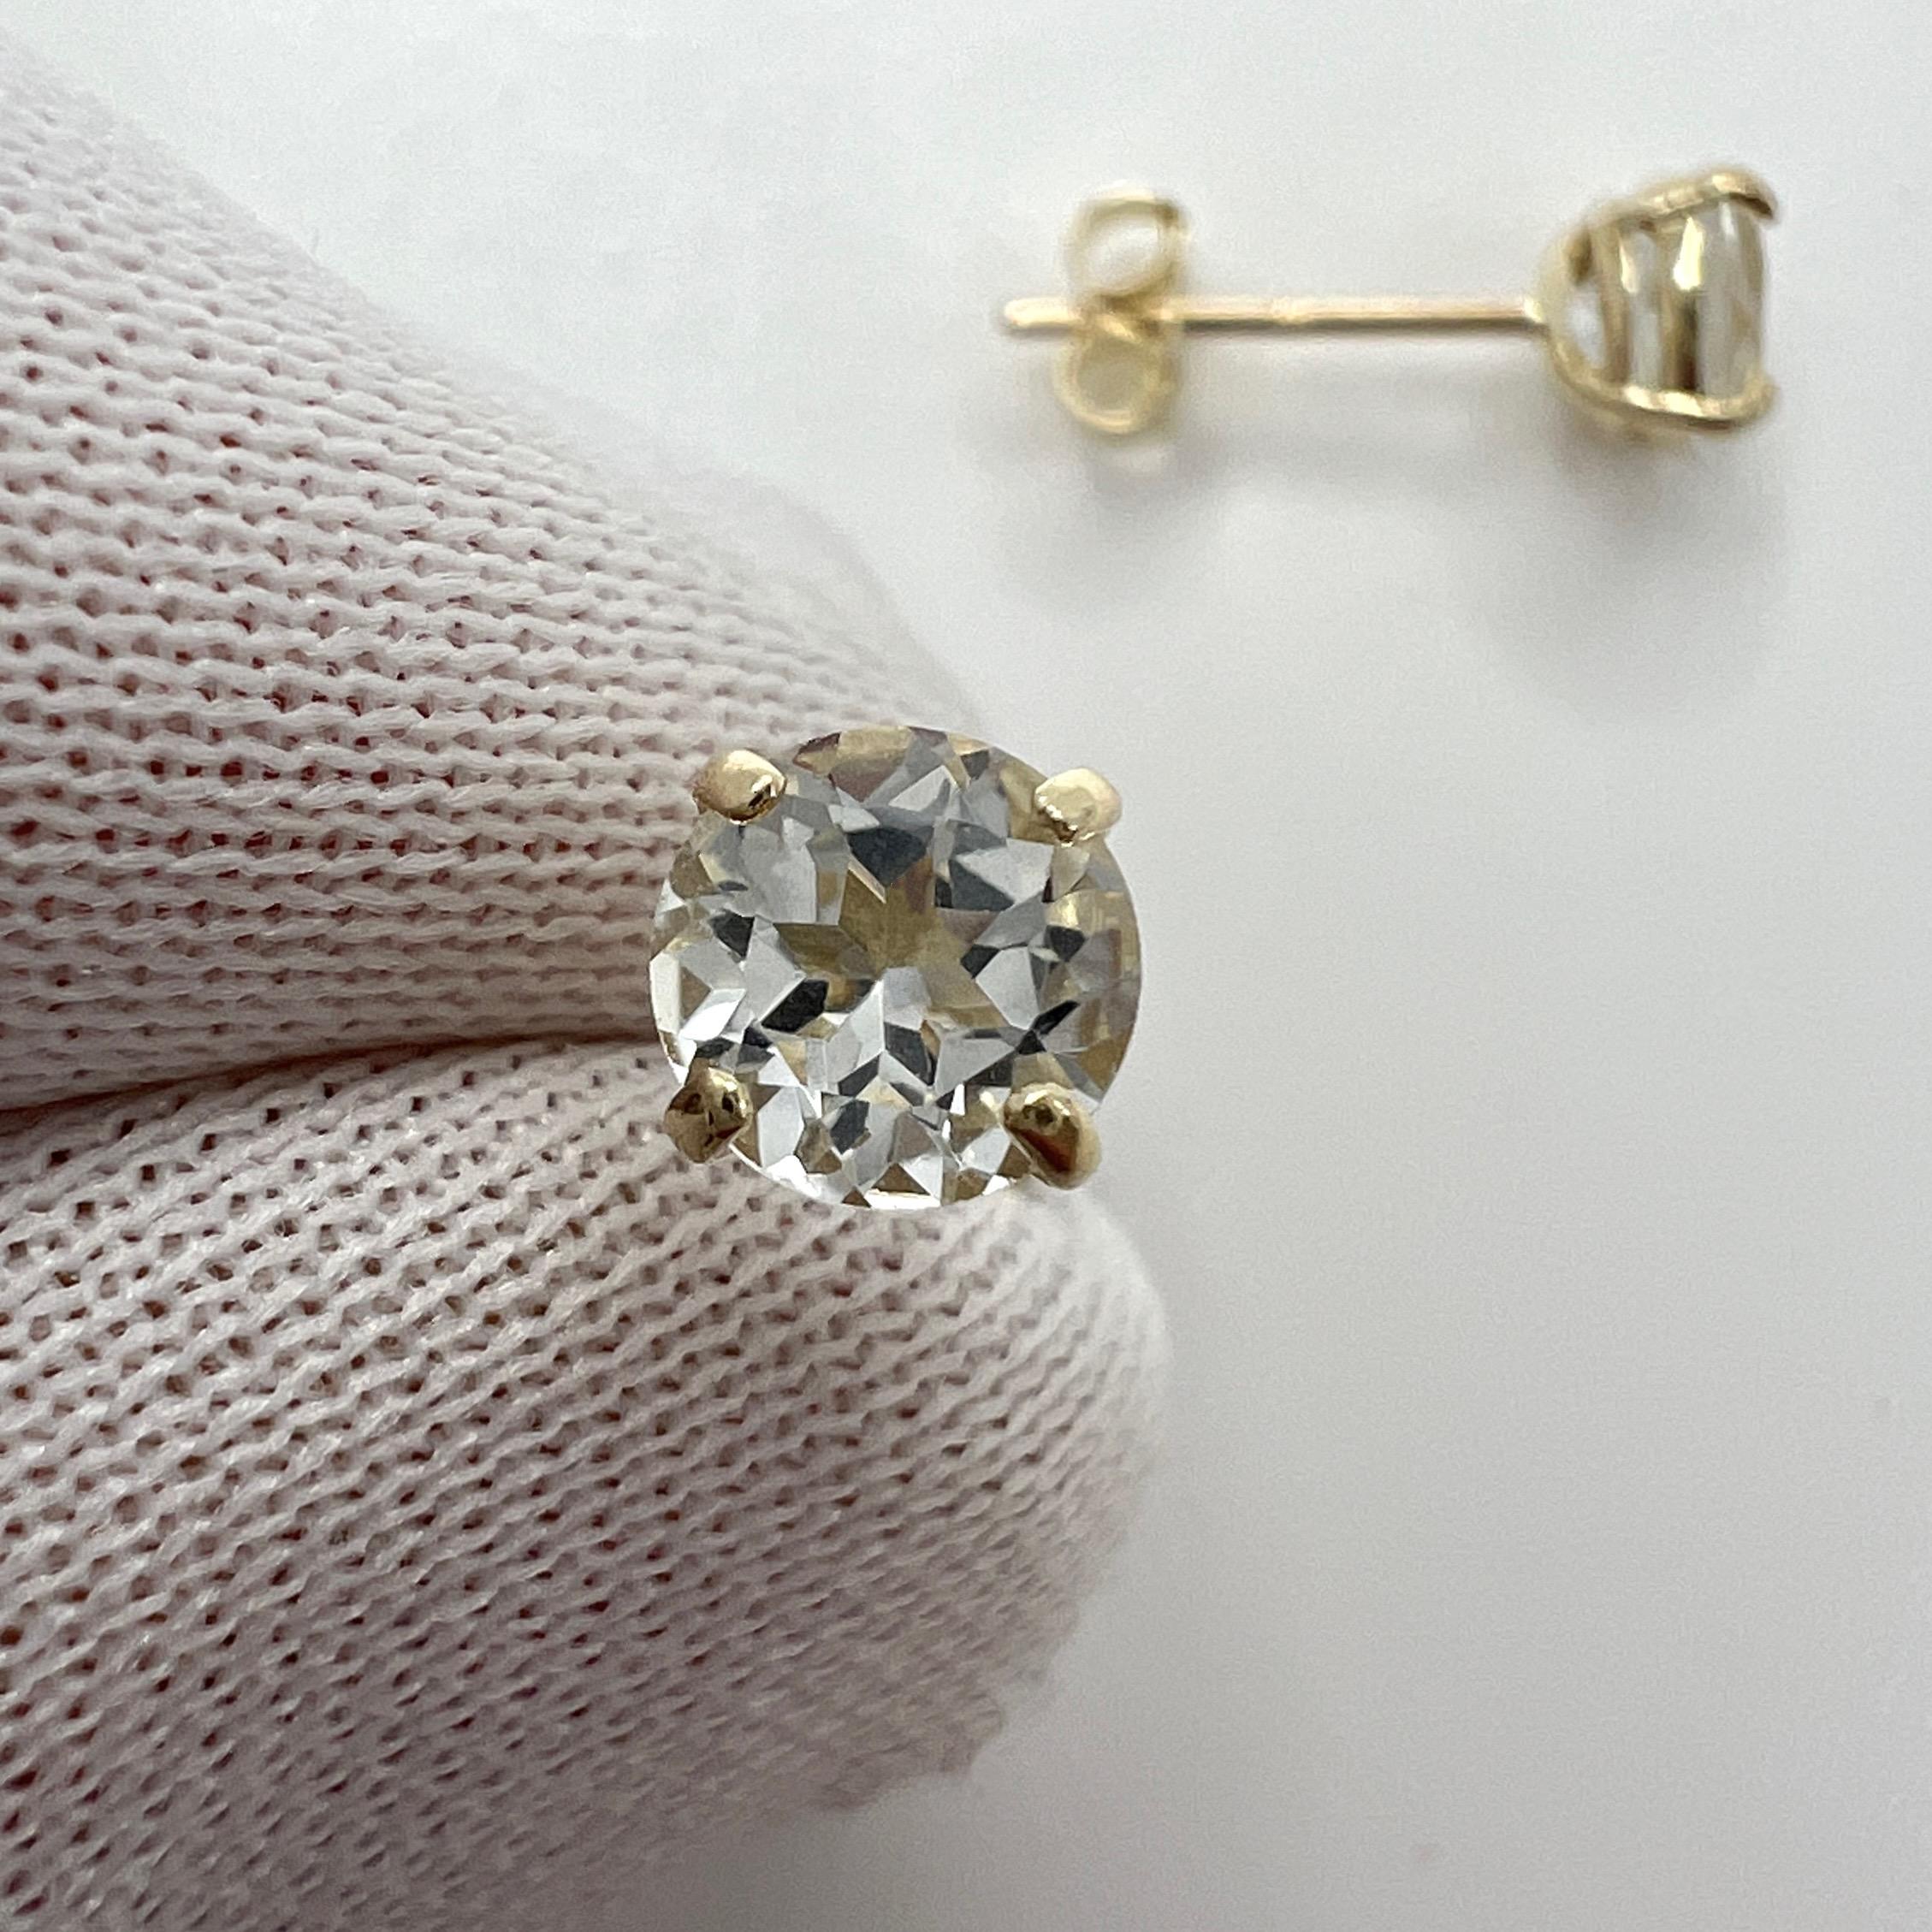 Natural White Topaz 5mm Round Cut 1.15ct 9K Yellow Gold Stud Earrings.

Beautiful 5mm matching pair of natural white topaz with excellent clarity and an excellent round brilliant cut. 

The gemstones may vary slightly from the images as these studs